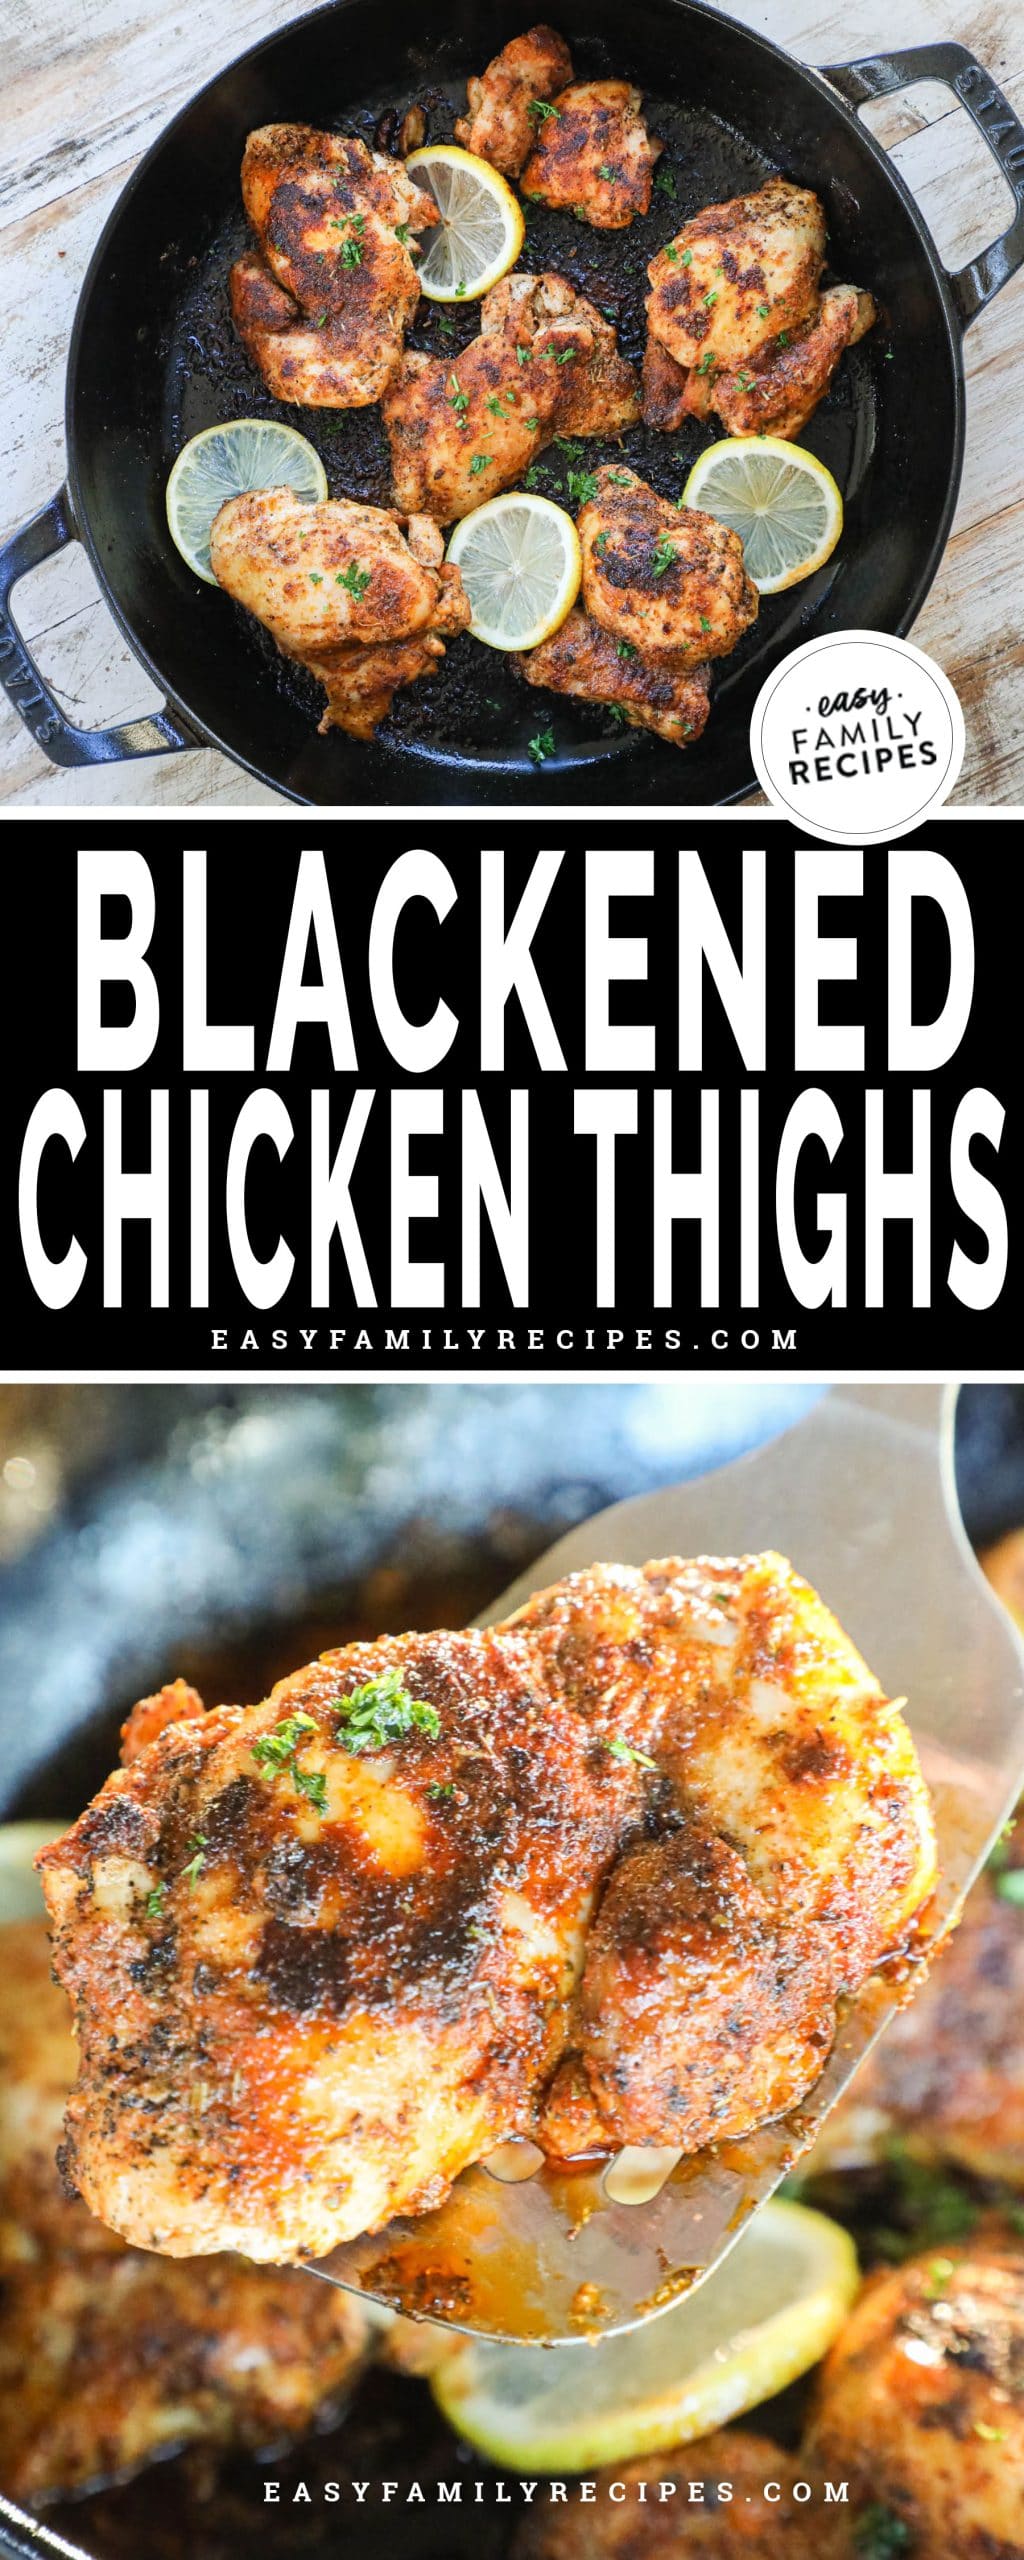 Blackened chicken thighs cooked in a cast iron skillet with lemon and butter